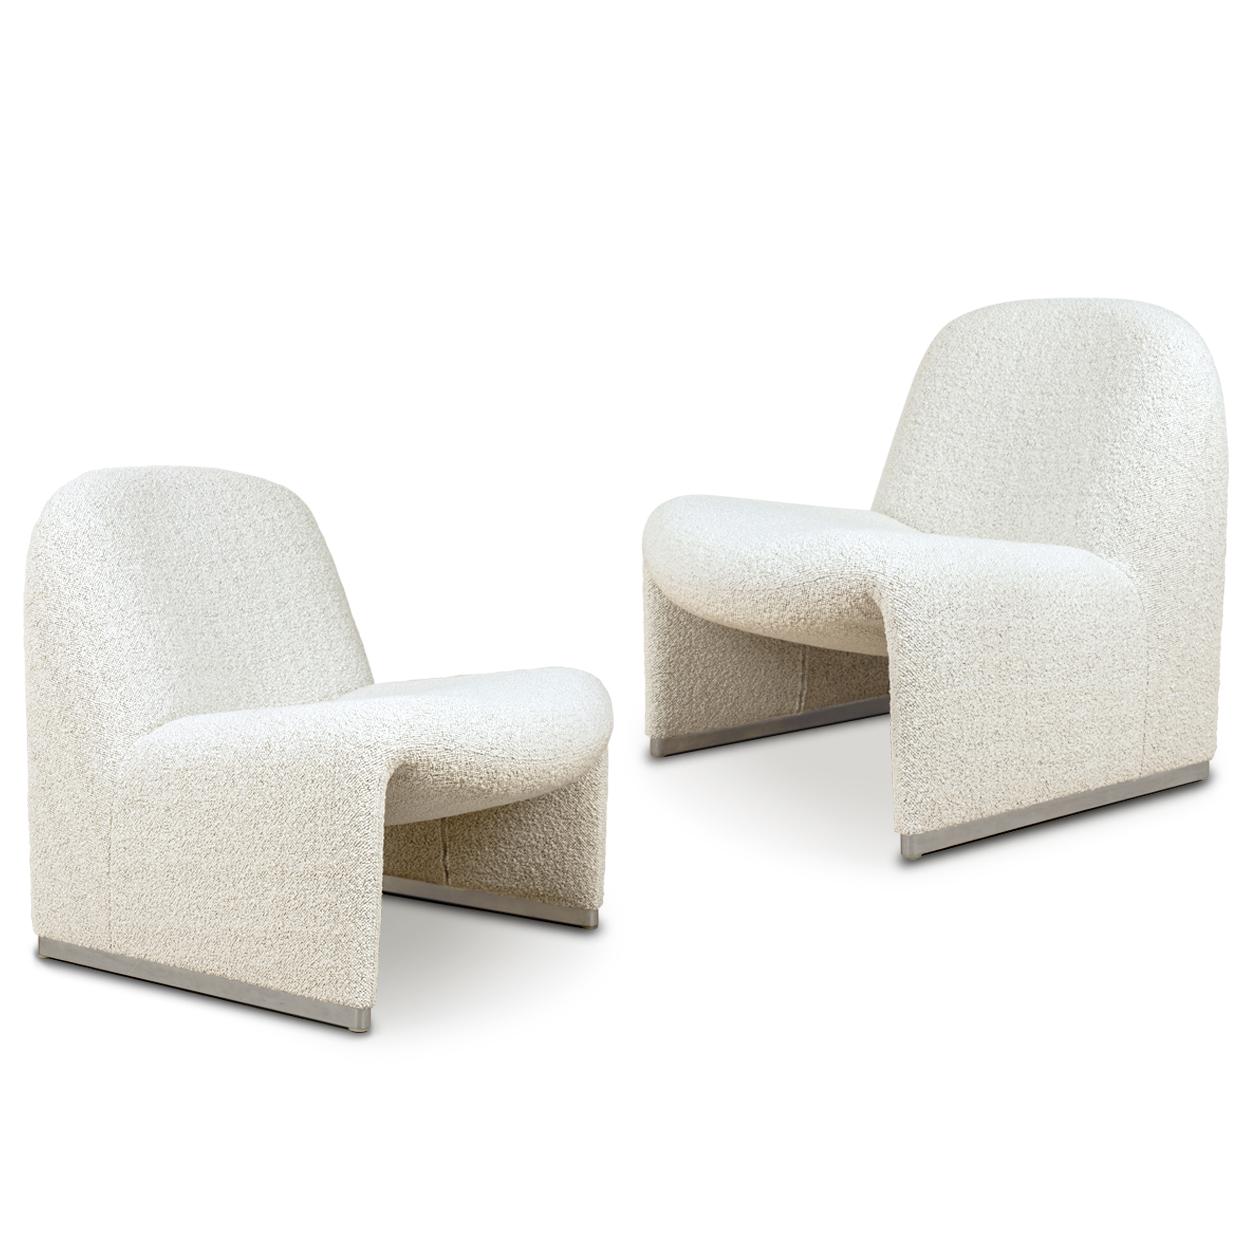 Foam Pair of “Alky” Chairs by G. Piretti for Castelli New Upholstery Boucle by Dedar